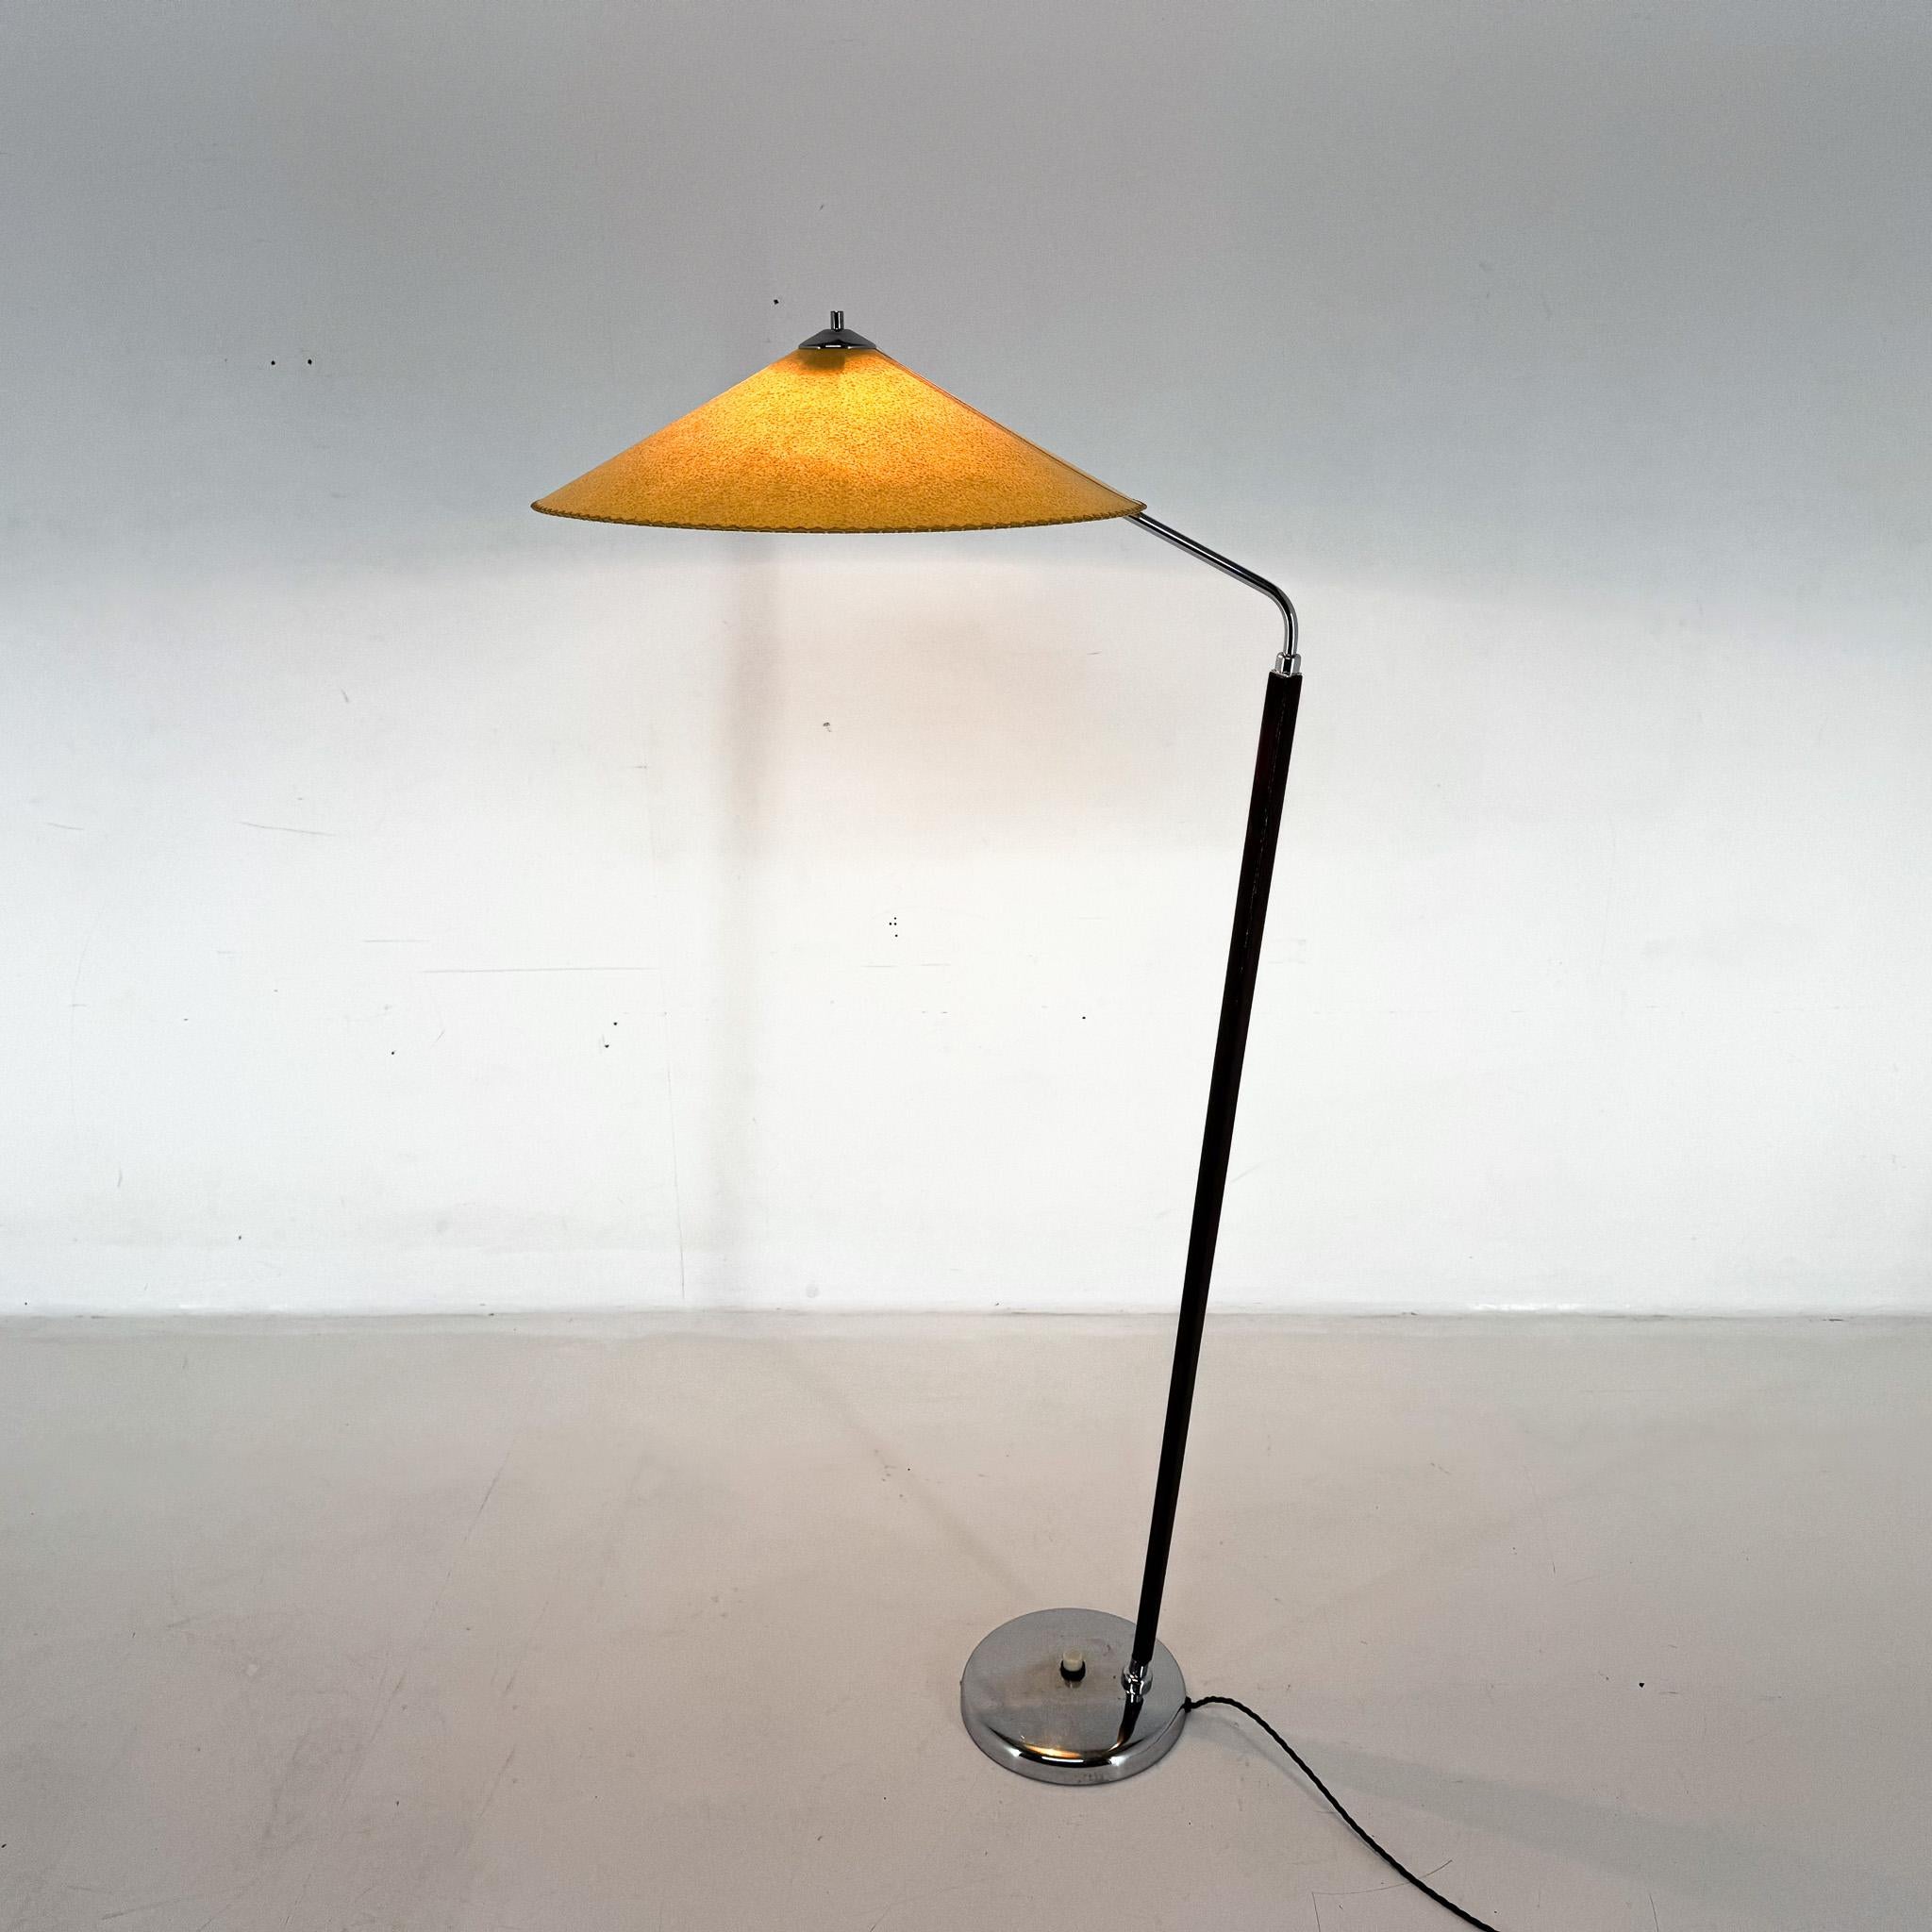 Iconic Zukov floor lamp made in former Czechoslovakia in the 1960s.
Completely restored, polished, new parchment shade, rewired:
2x40W, E26-E27 bulbs.
US plug adapter included.